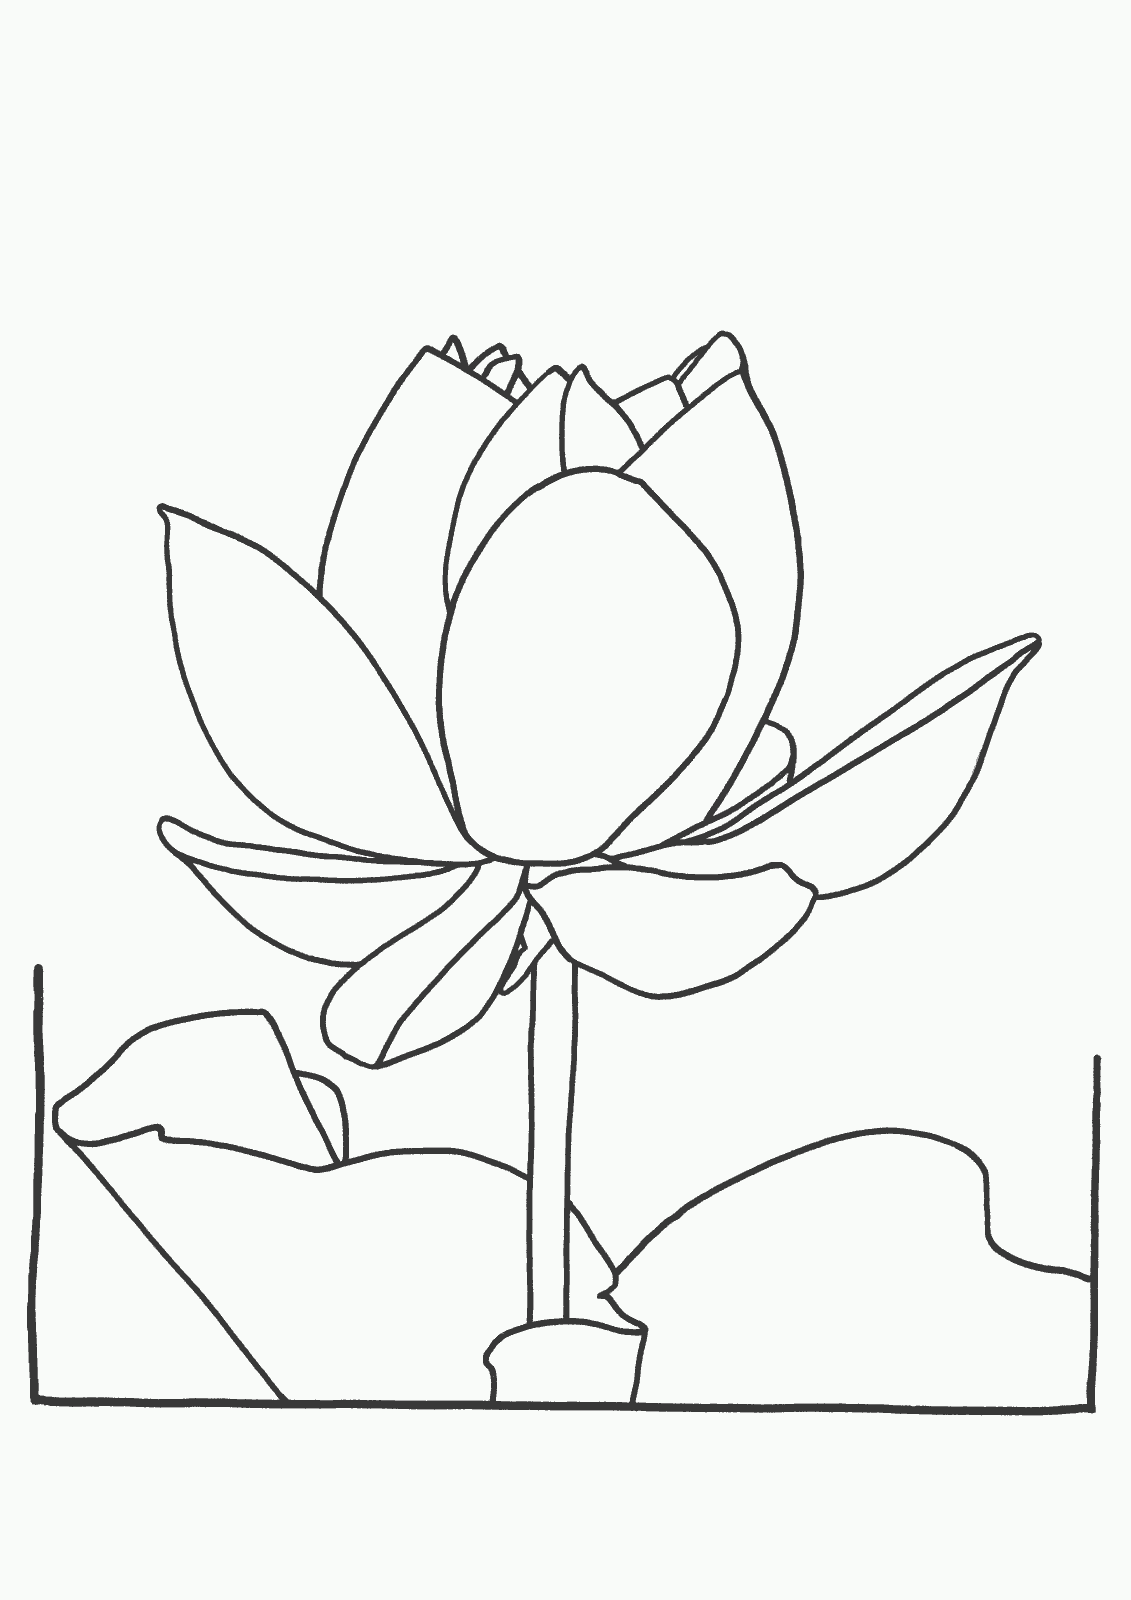 Printable Lotus Flower Coloring Pages | Coloring